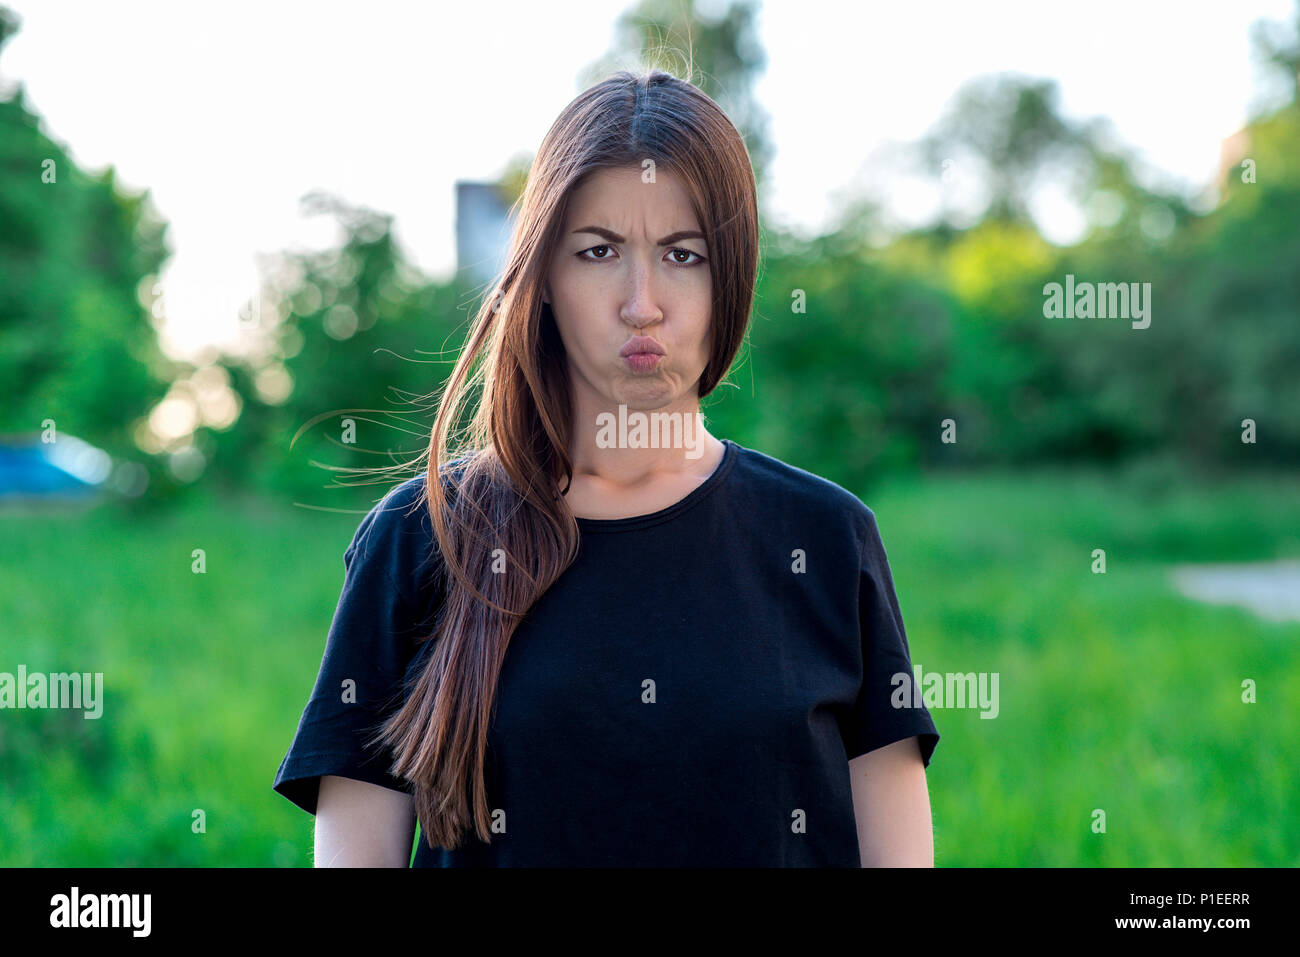 Girl in summer in the park in fresh air. Close-up portrait. The girl pouted. She puffed out her cheeks. Dissatisfied expression. Brunette with freckles. Emotional kiss. Whimsical Woman. Stock Photo